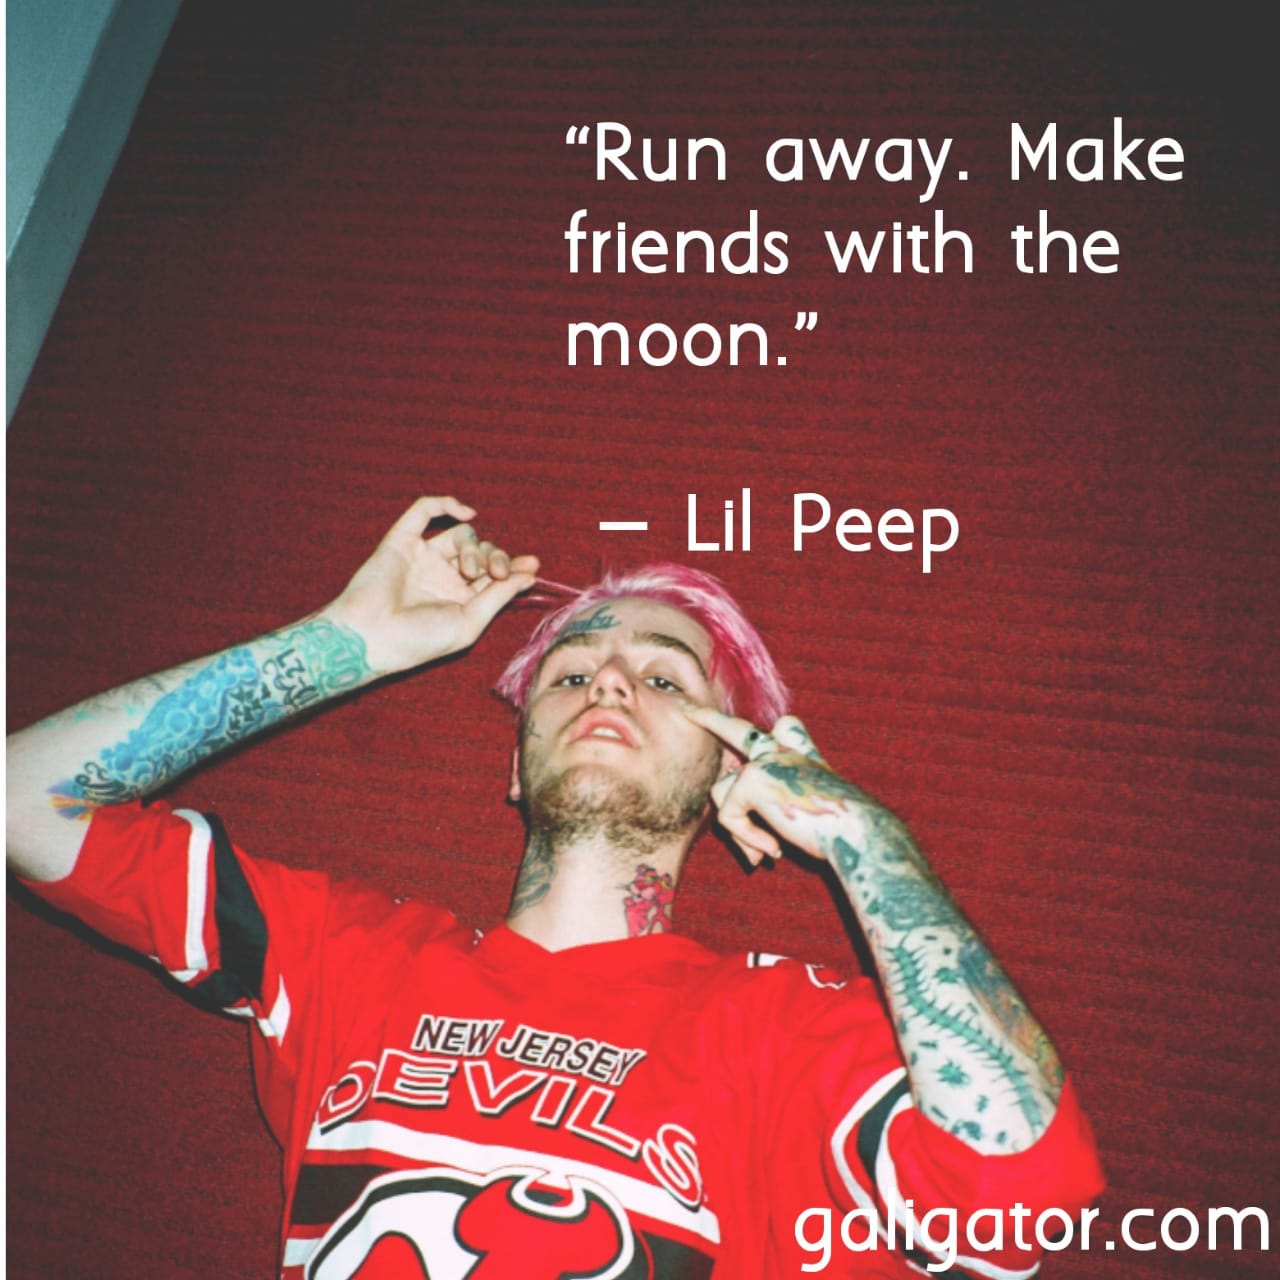 lil peep quotes , best lil peep quotes, lil peep love quotes, quotes by lil peep, lil peep quote, lil peep quotes, lil peep love quotes, lil peep quotes about love, lil peep song quotes, lil peep quote, lil peep lyrics quotes,  best lil peep quotes, lil peep sad quotes, lil peep quotes from songs, deep meaningful lil peep quotes,  lil peep quotes about life,  peep quotes , lil peep captions , lil peep sayings ,